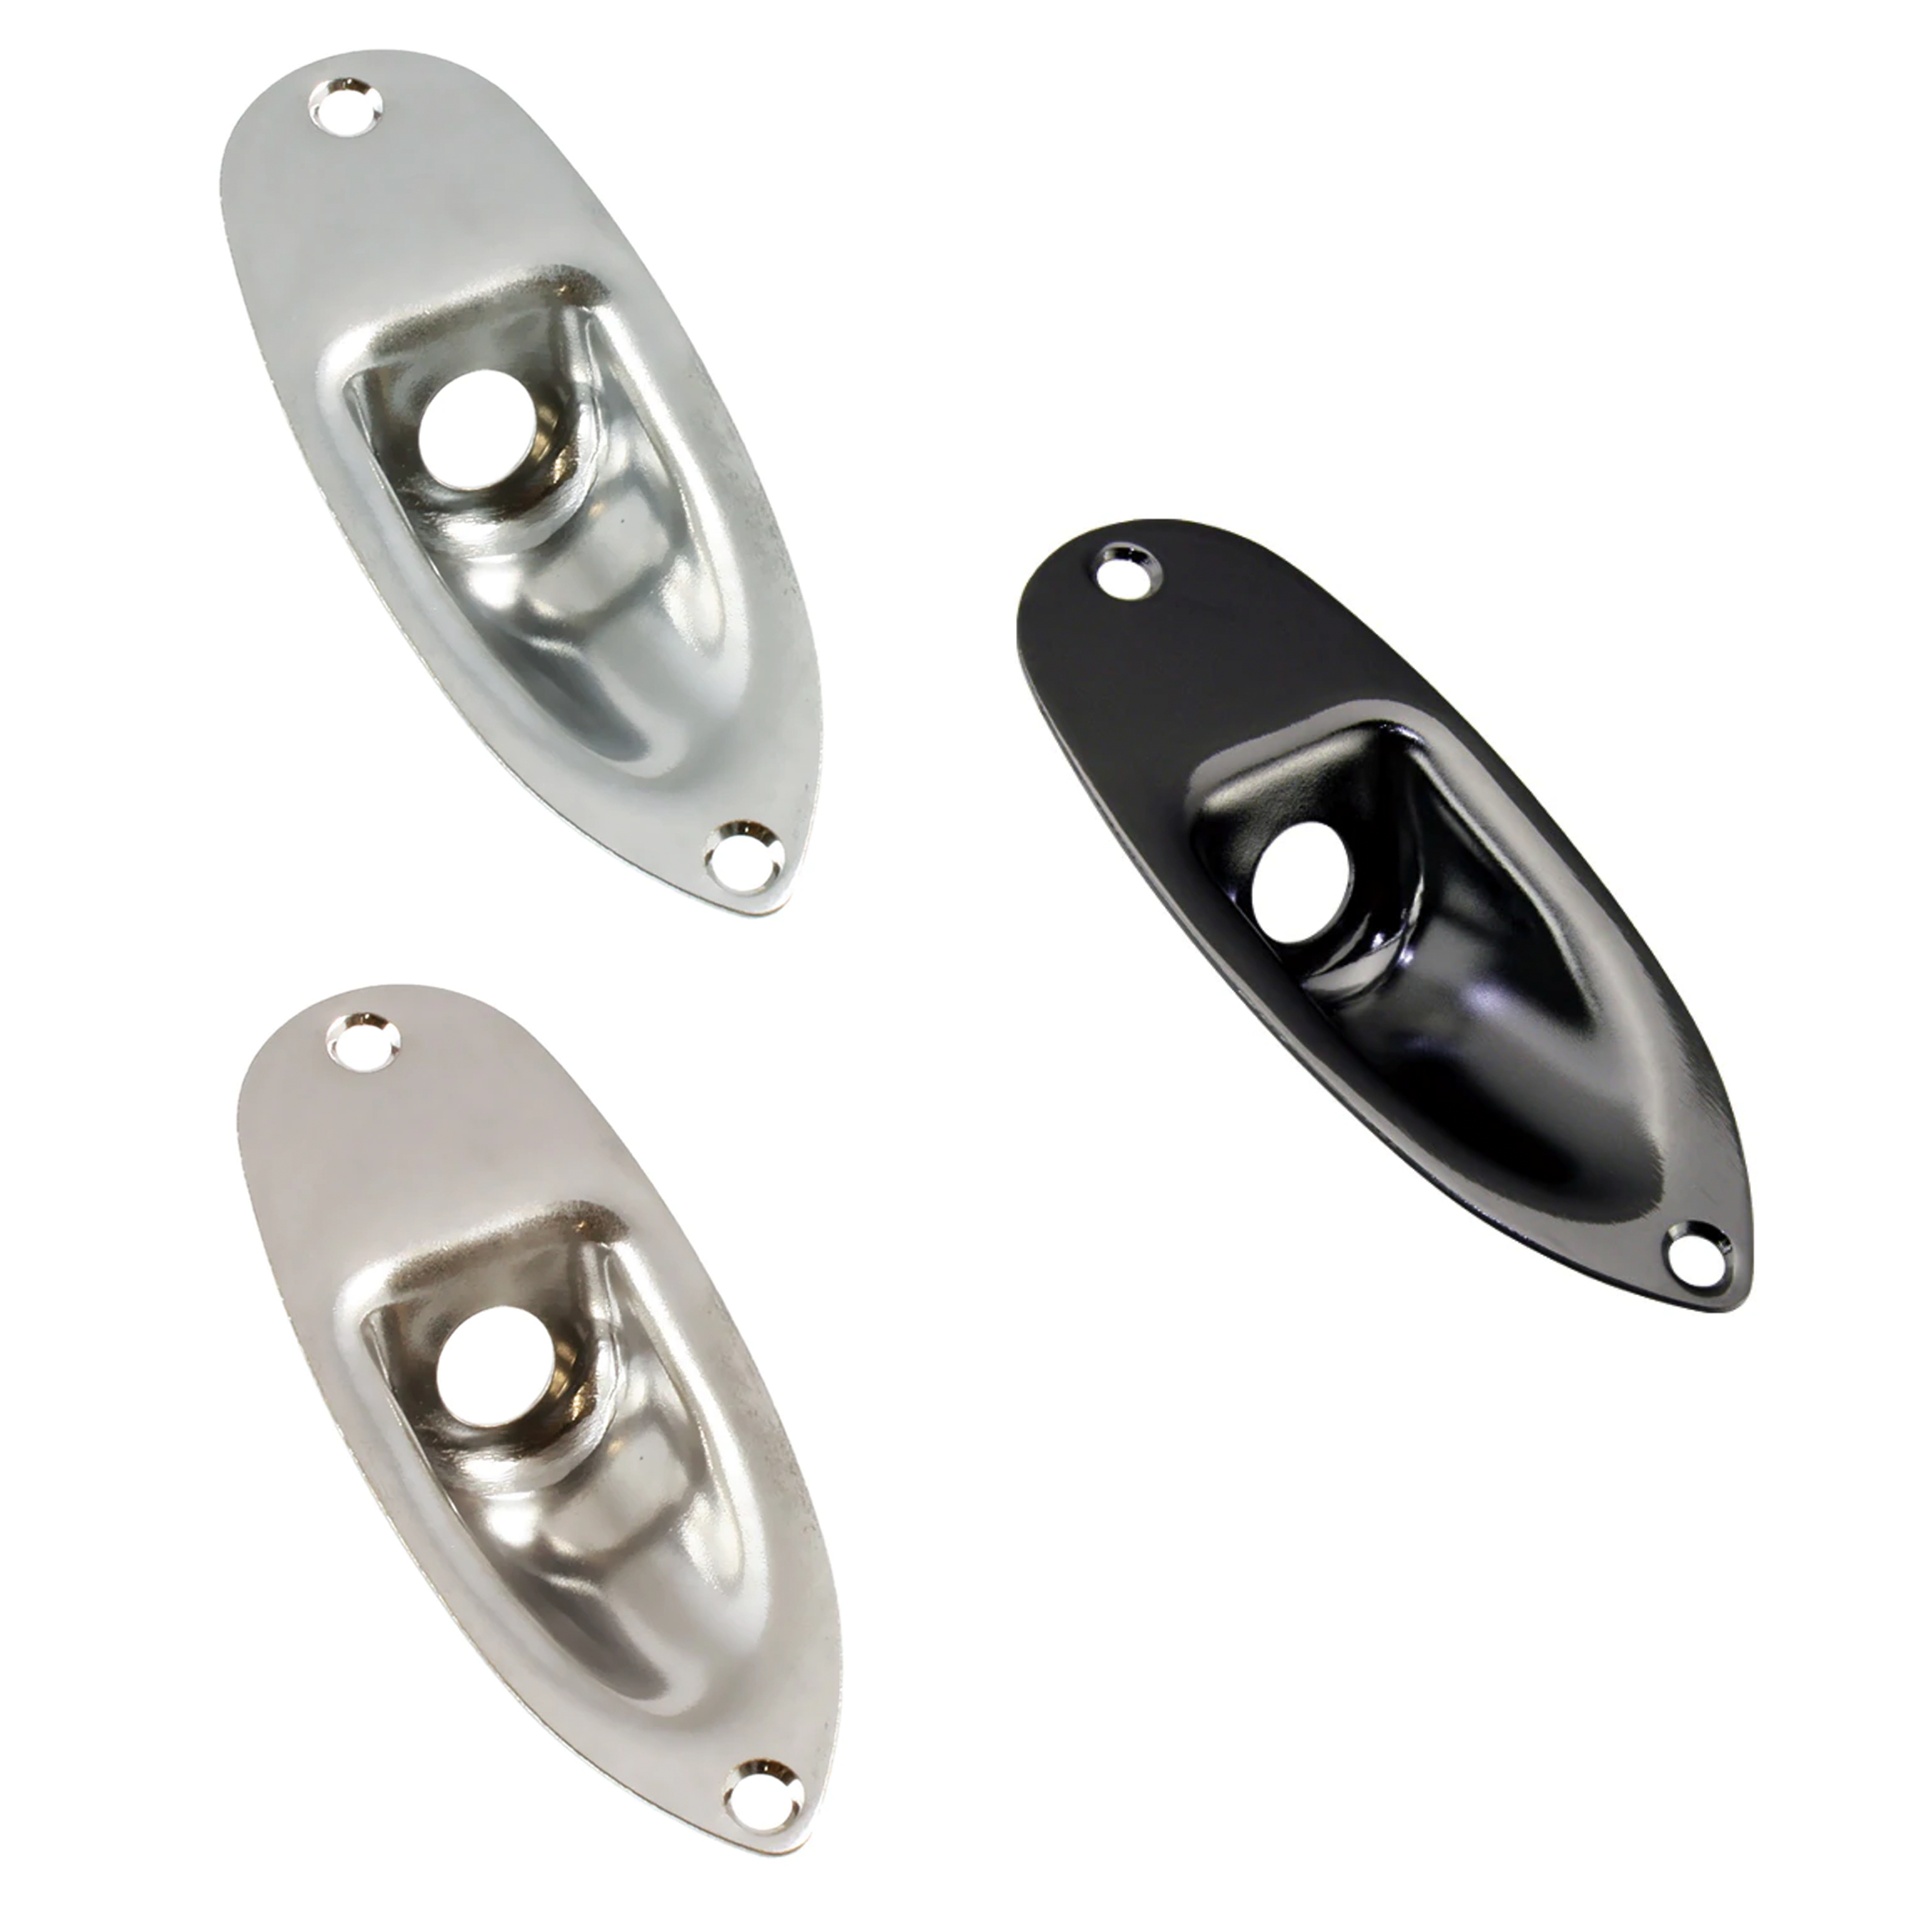 AllParts Jackplate for Stratocaster® (Black, Chrome, Nickel)